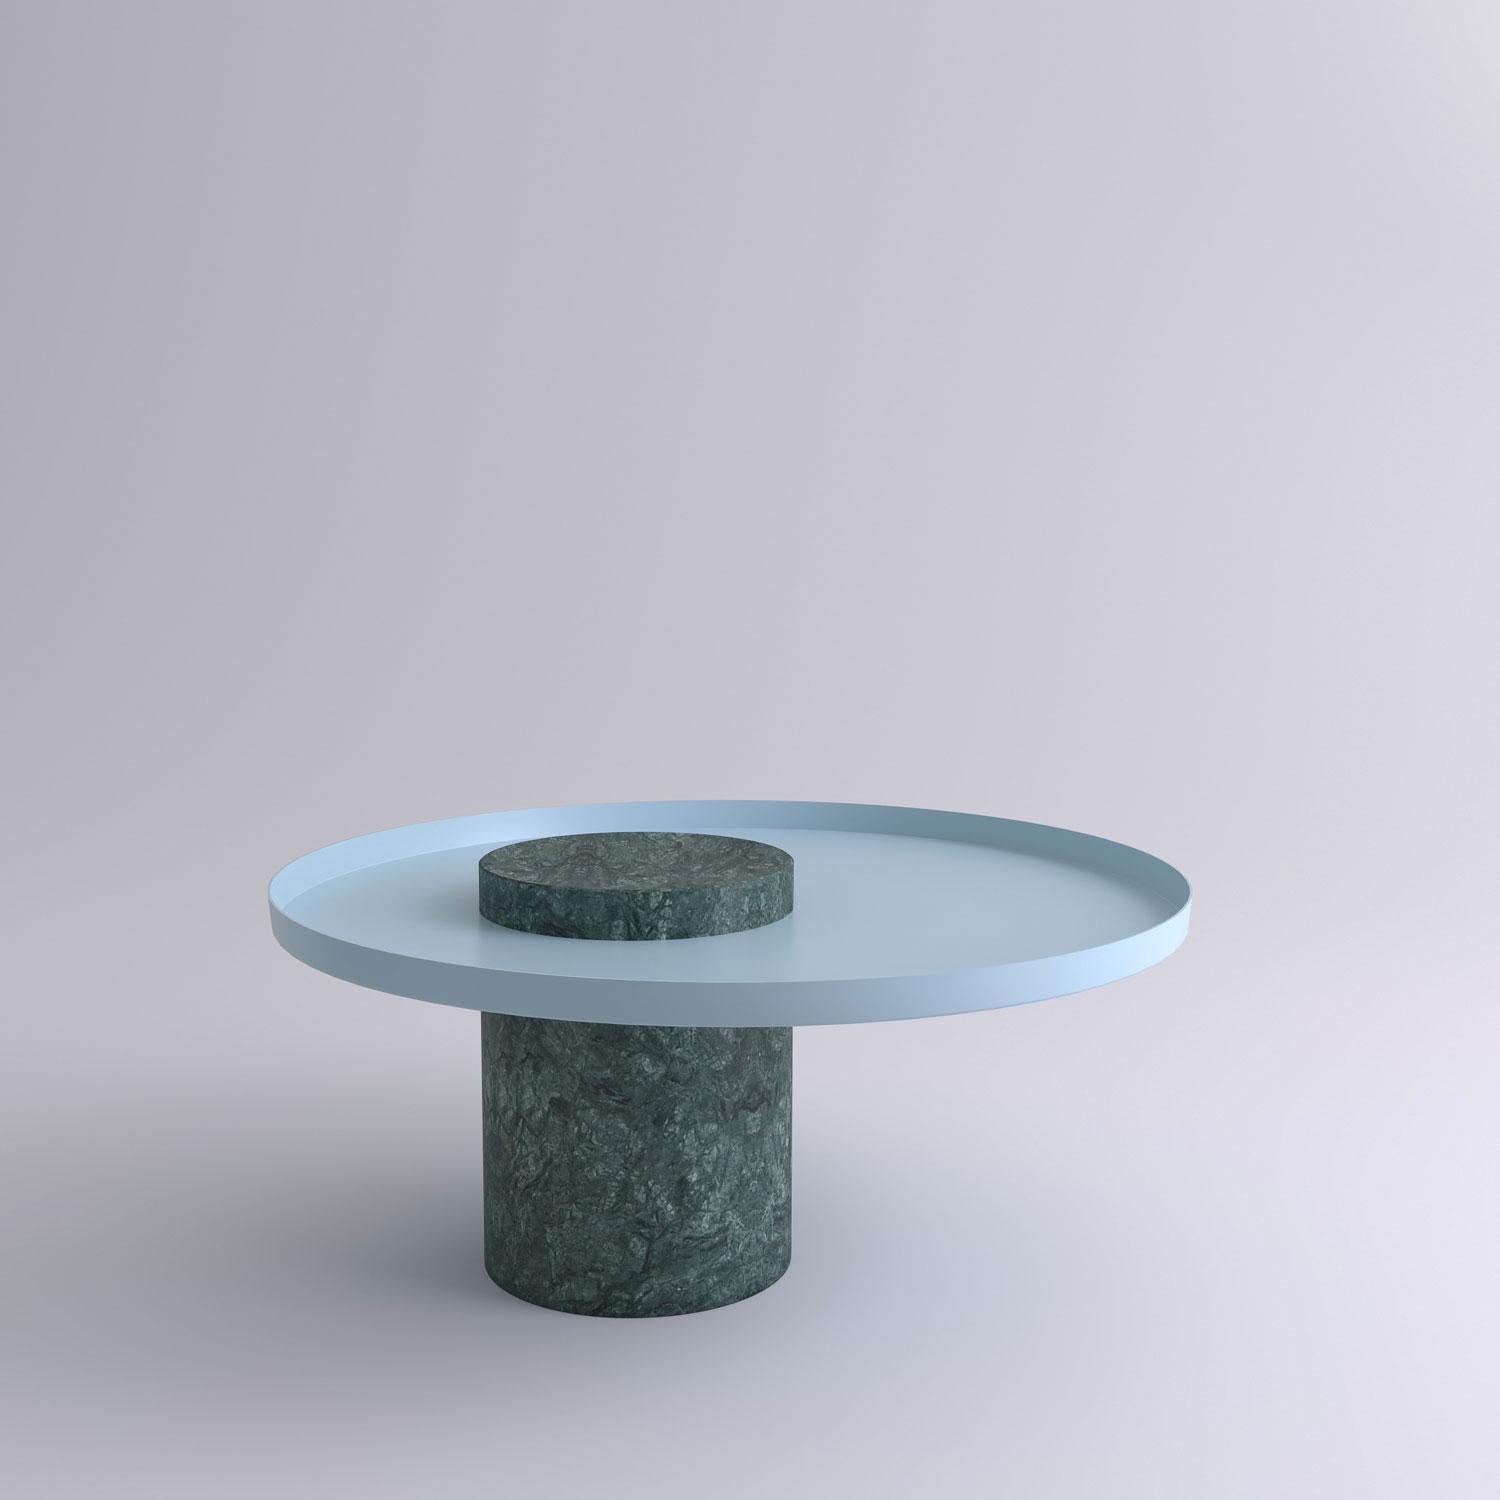 Low indian green marble contemporary guéridon, Sebastian Herkner
Dimensions: D 70 x H 33 cm
Materials: Indian Green marble, light blue metal tray

The salute table exists in 3 sizes, 4 different marble stones for the column and 5 different